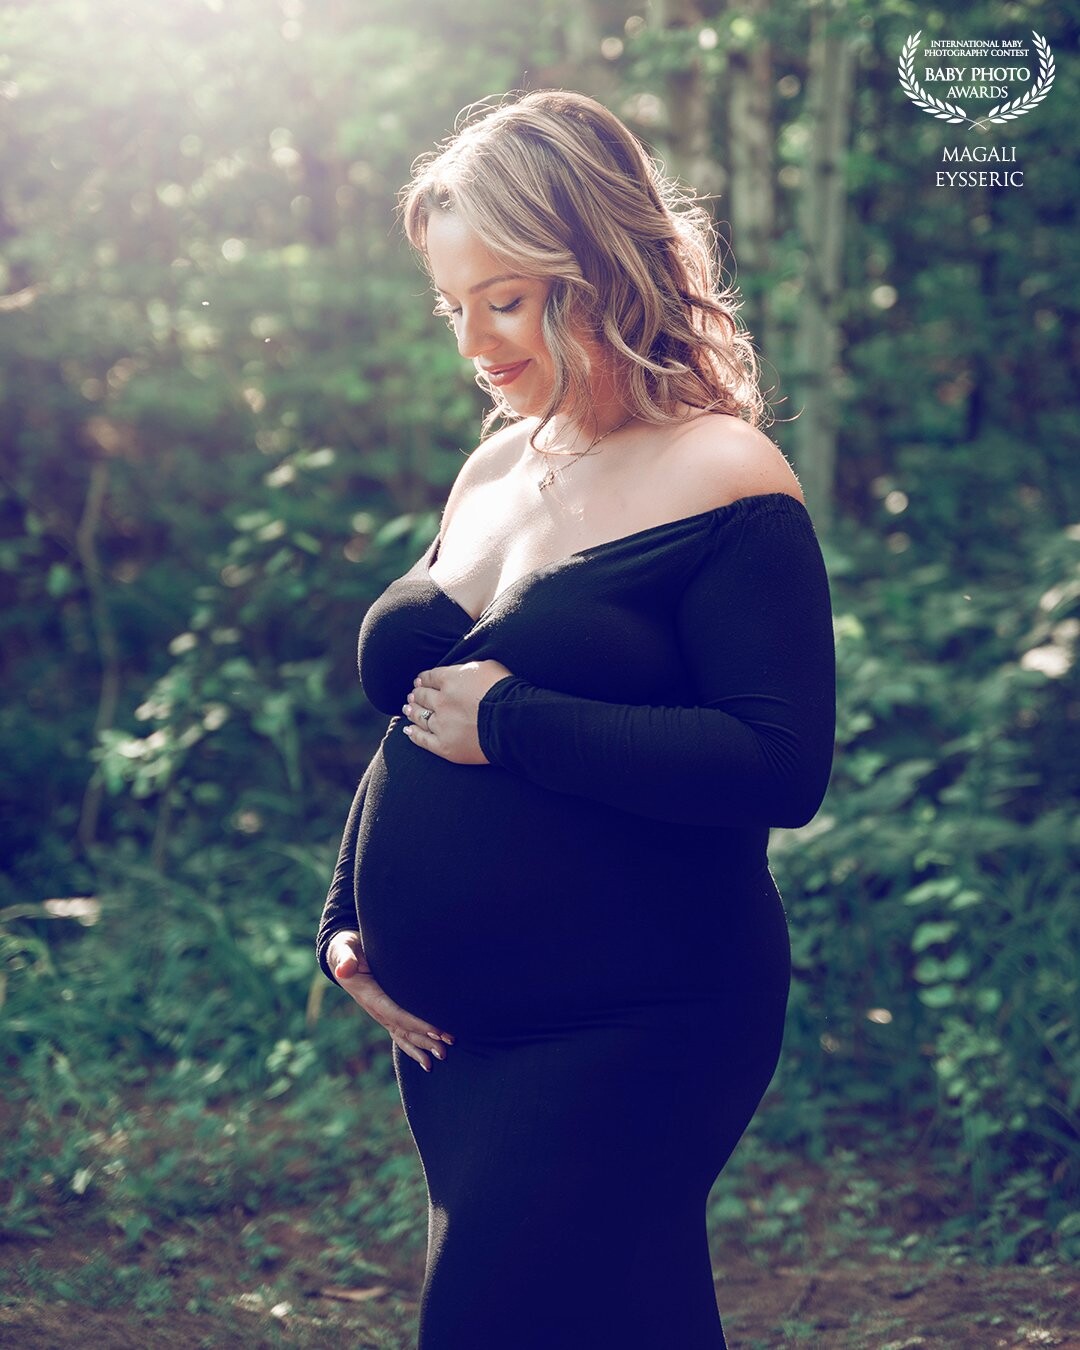 this beautiful mom came to see me for the first time to immortalize her pregnancy. it was an immediate hit. the light is completely natural in this photo